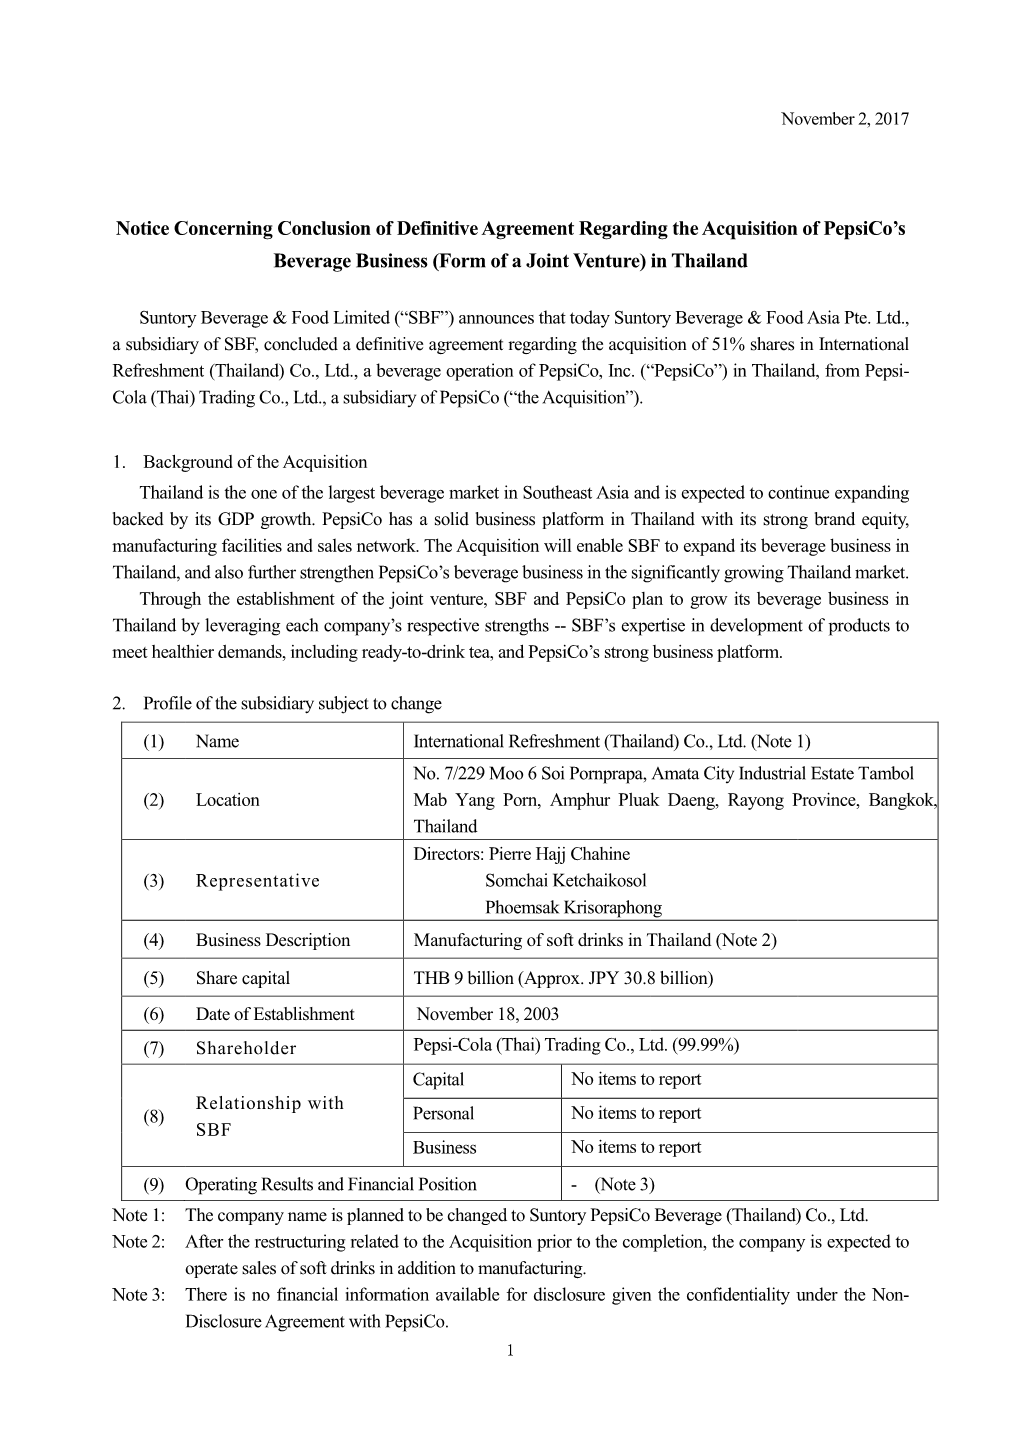 Notice Concerning Conclusion of Definitive Agreement Regarding the Acquisition of Pepsico’S Beverage Business (Form of a Joint Venture) in Thailand